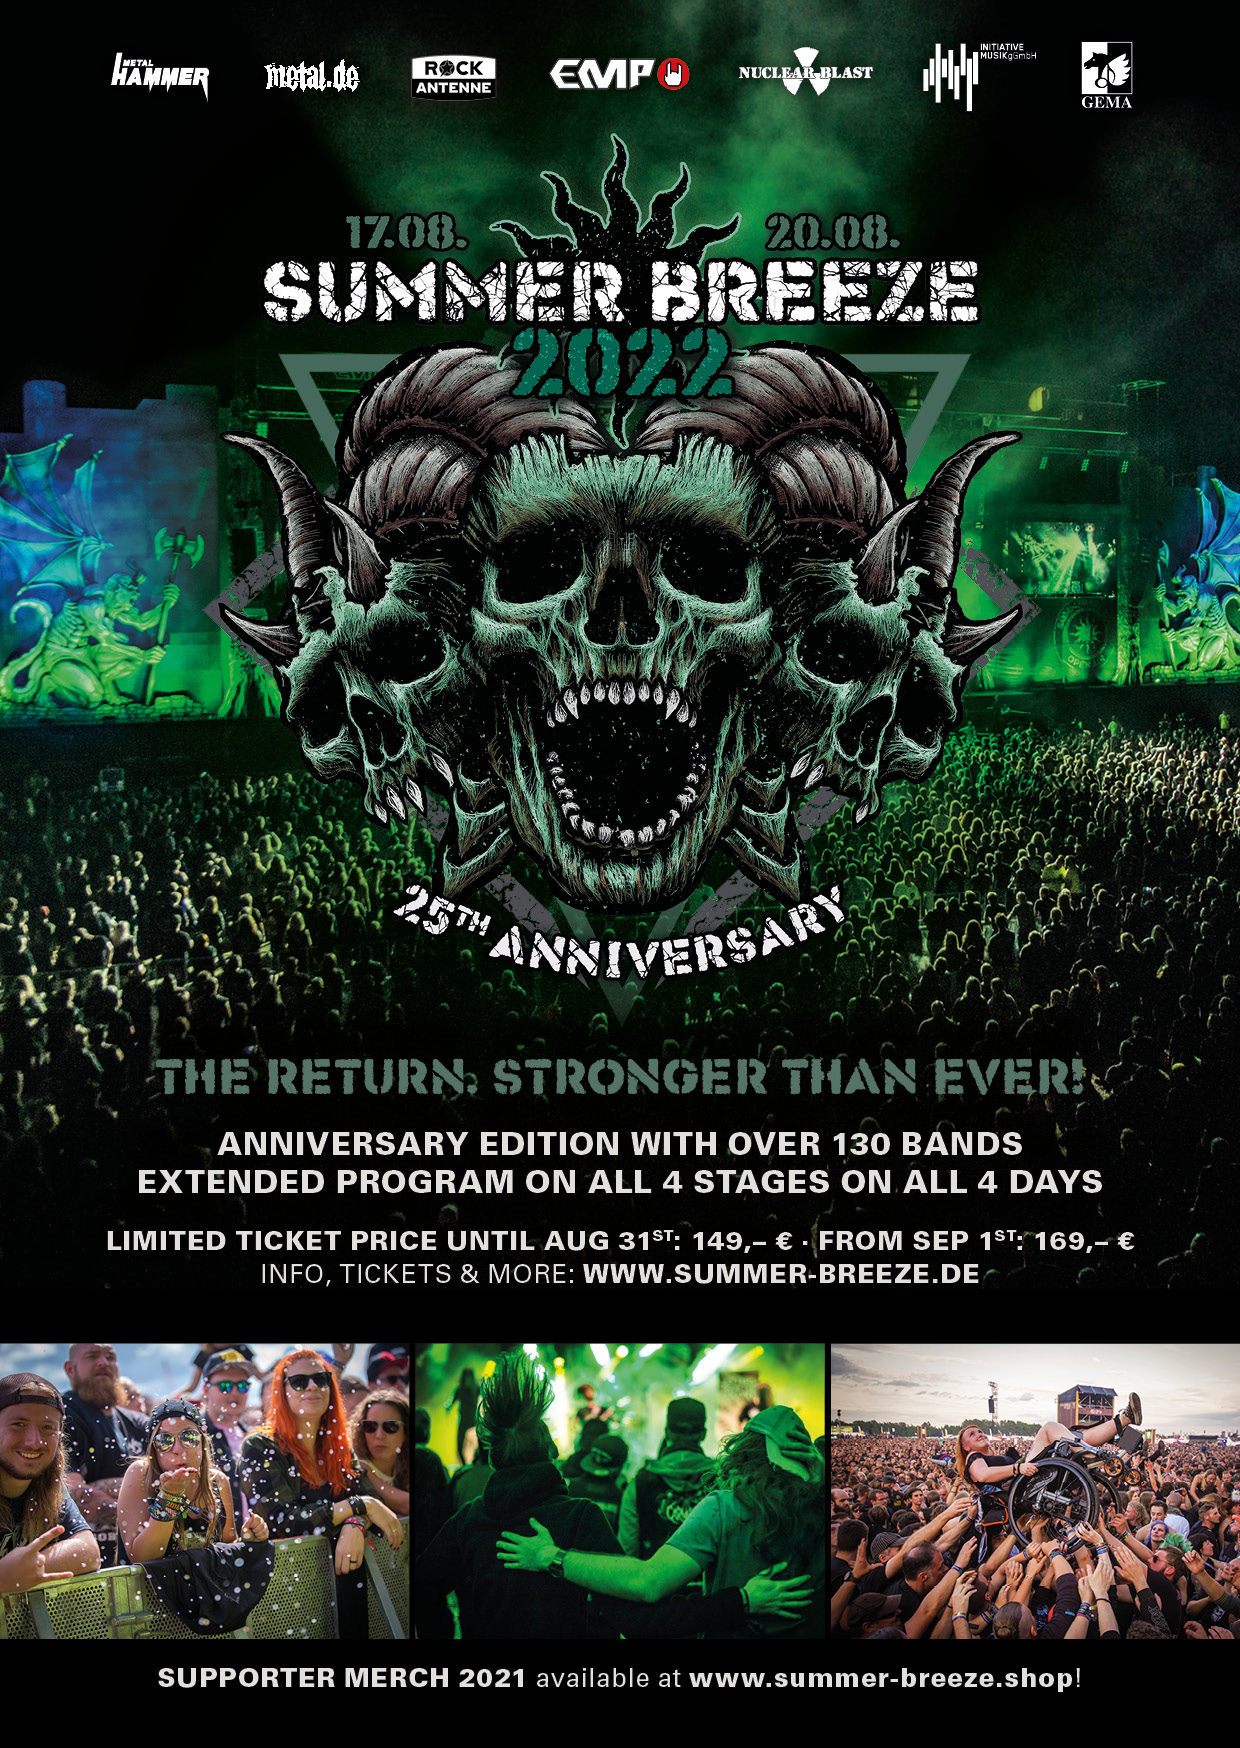 Come To The SUMMER BREEZE Open Air!